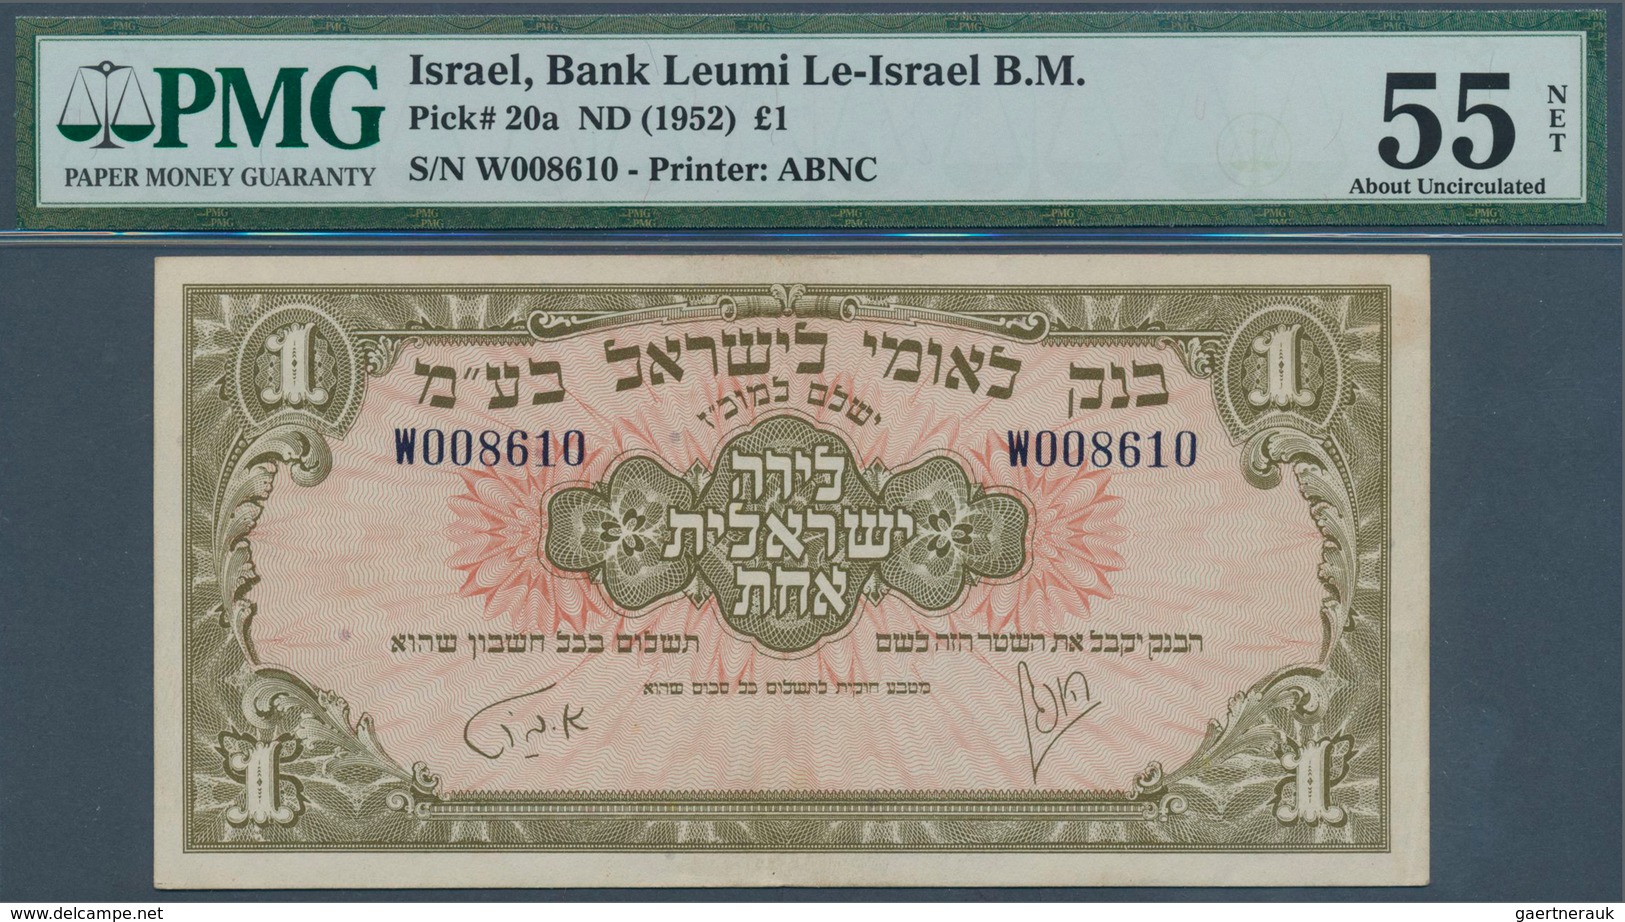 01838 Israel: 1 Pound ND(1952) P. 20a, In Condition PMG Graded 55 AUNC NET. - Israel